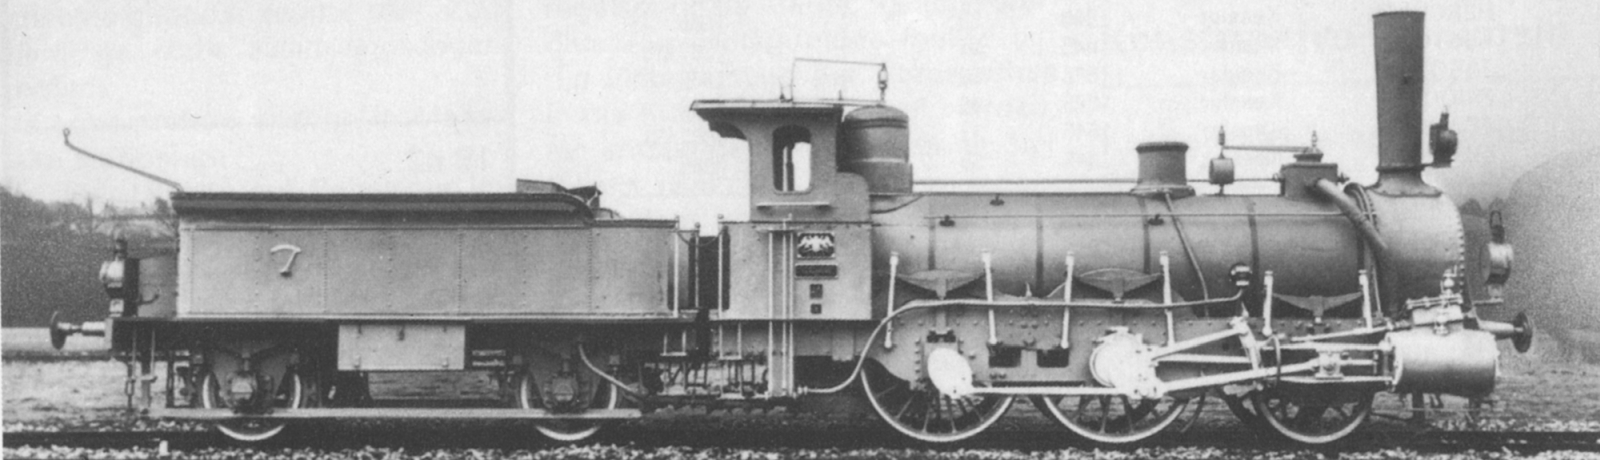 Side view of a locomotive with a two-axle tender